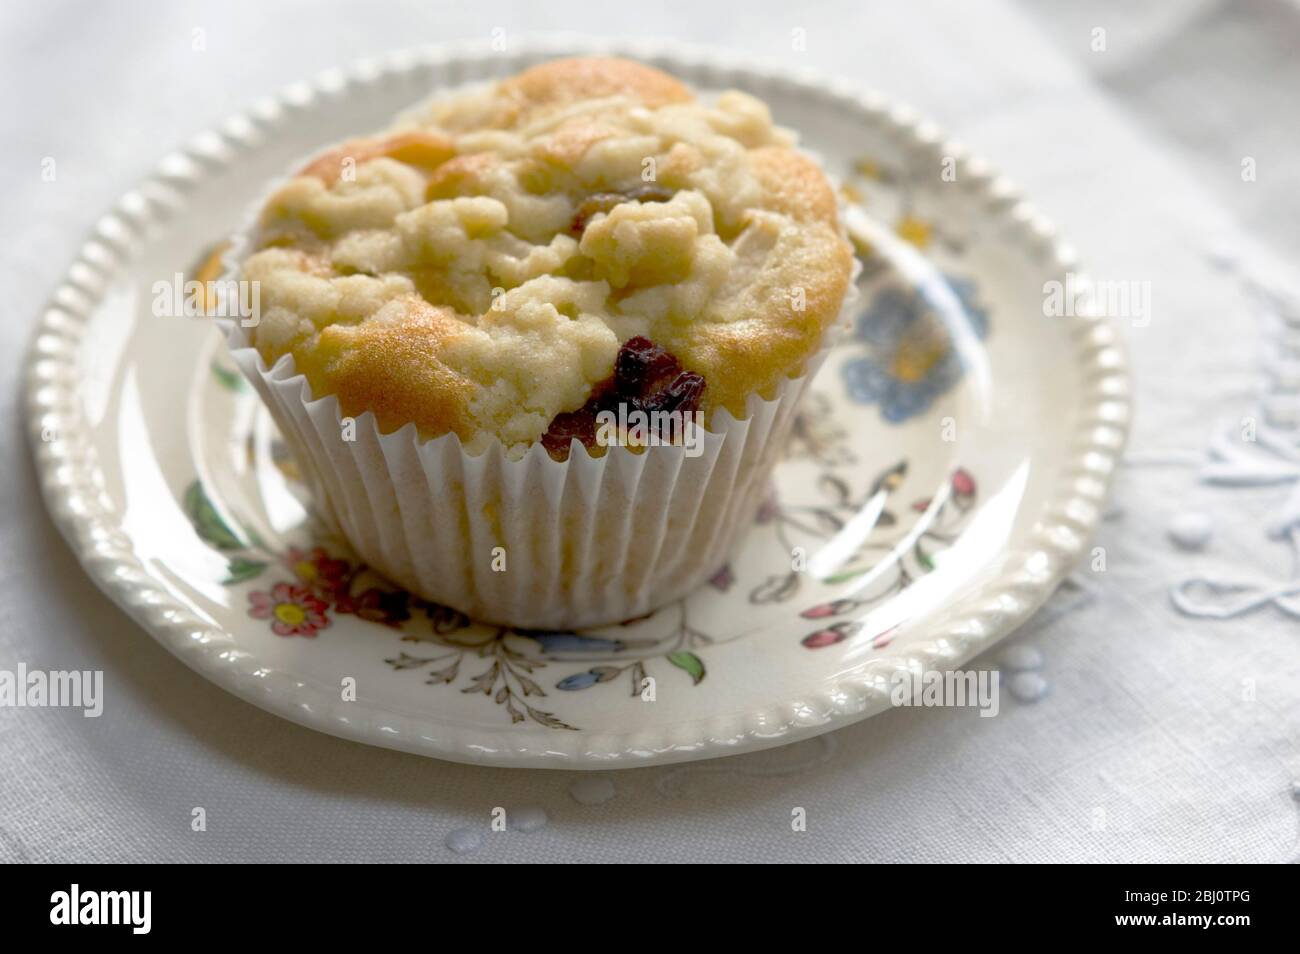 Muffin baked with topping of fresh grated apple on small patterned plate - Stock Photo